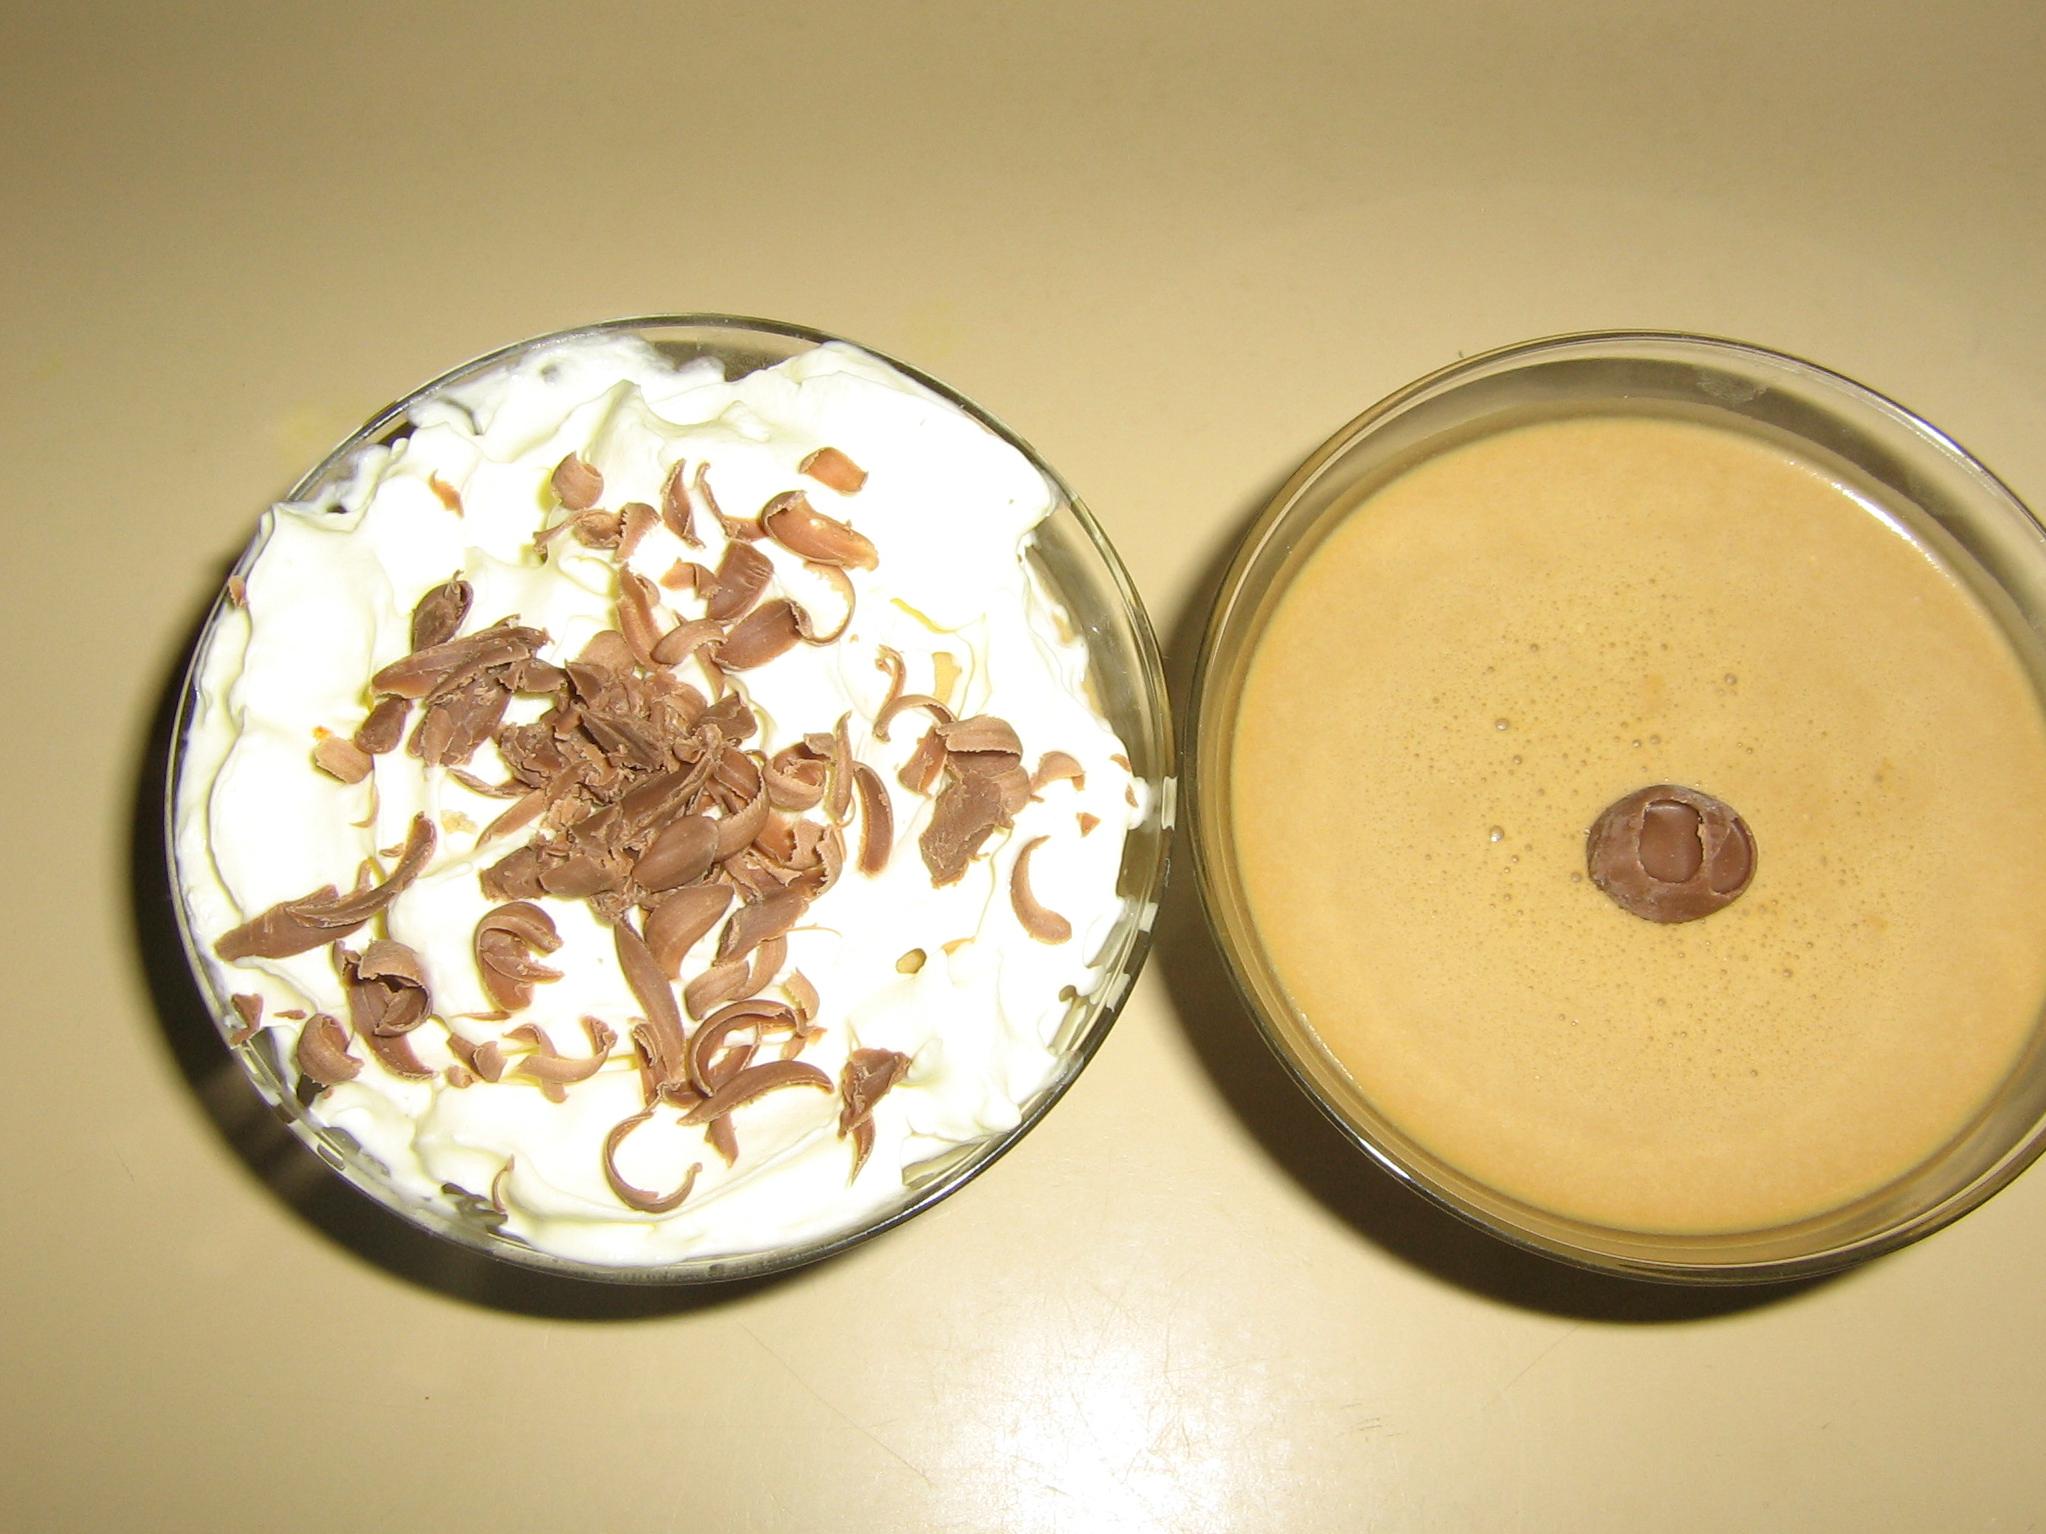 Coffee Mousse